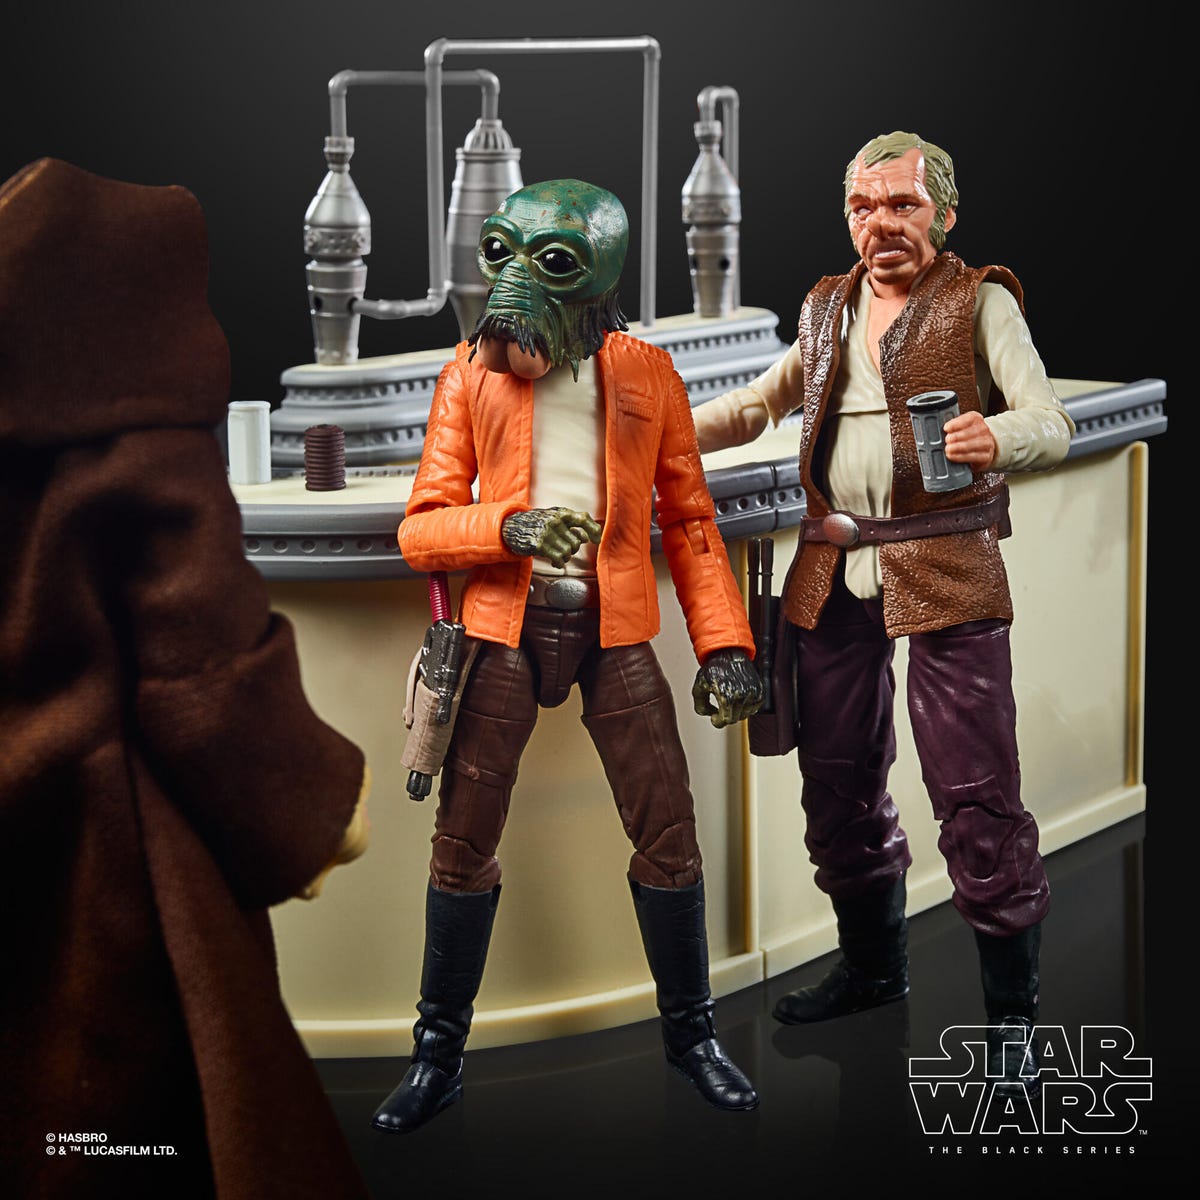 Star Wars Black Series Cantina Showdown playset in package